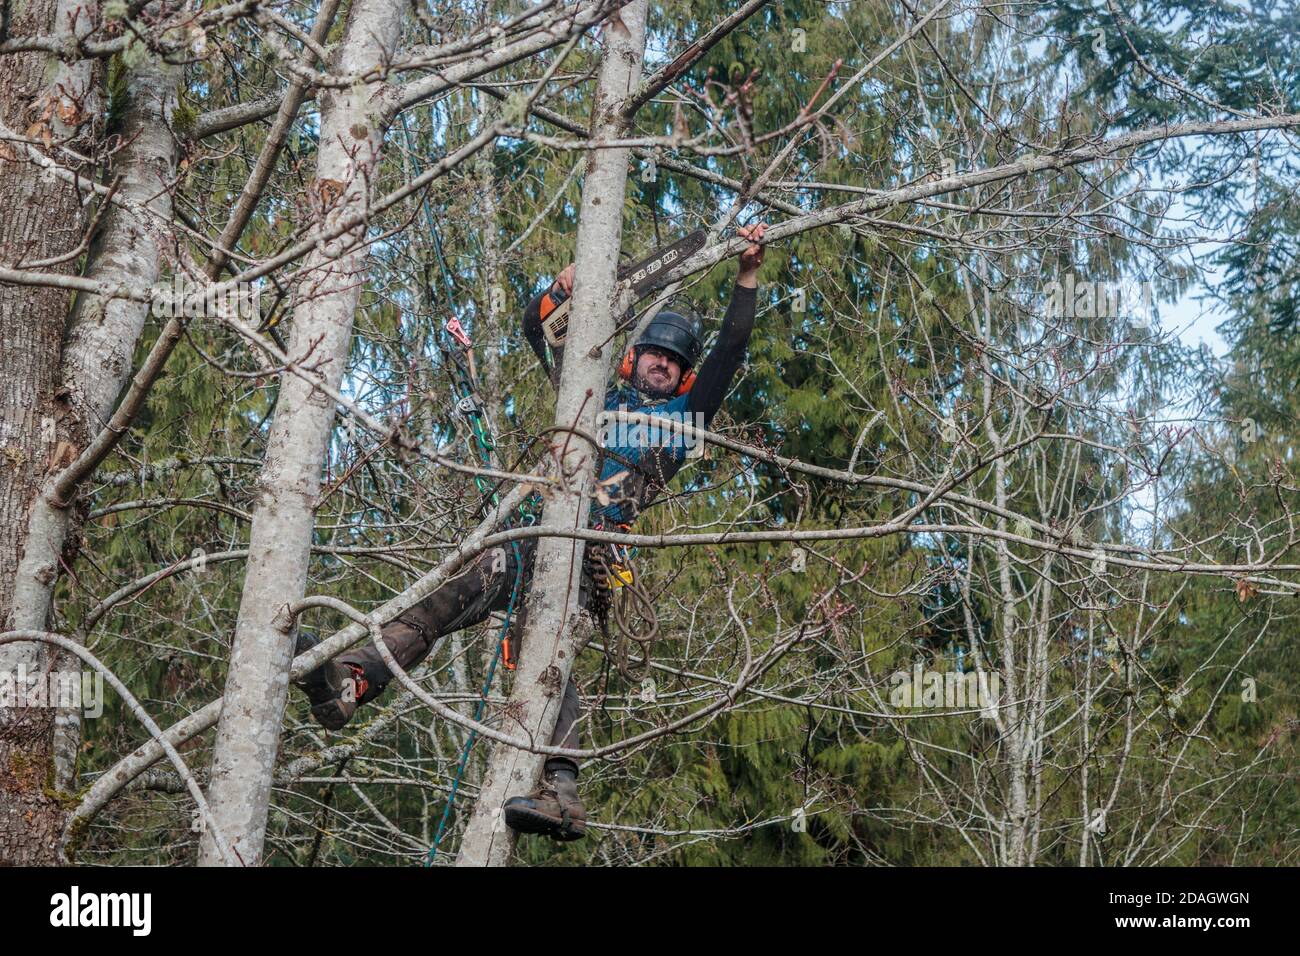 With ropes to hold him in place, a tree climber braces his legs on two trunks and uses a chainsaw to cut limbs above him from a sprawling maple tree. Stock Photo